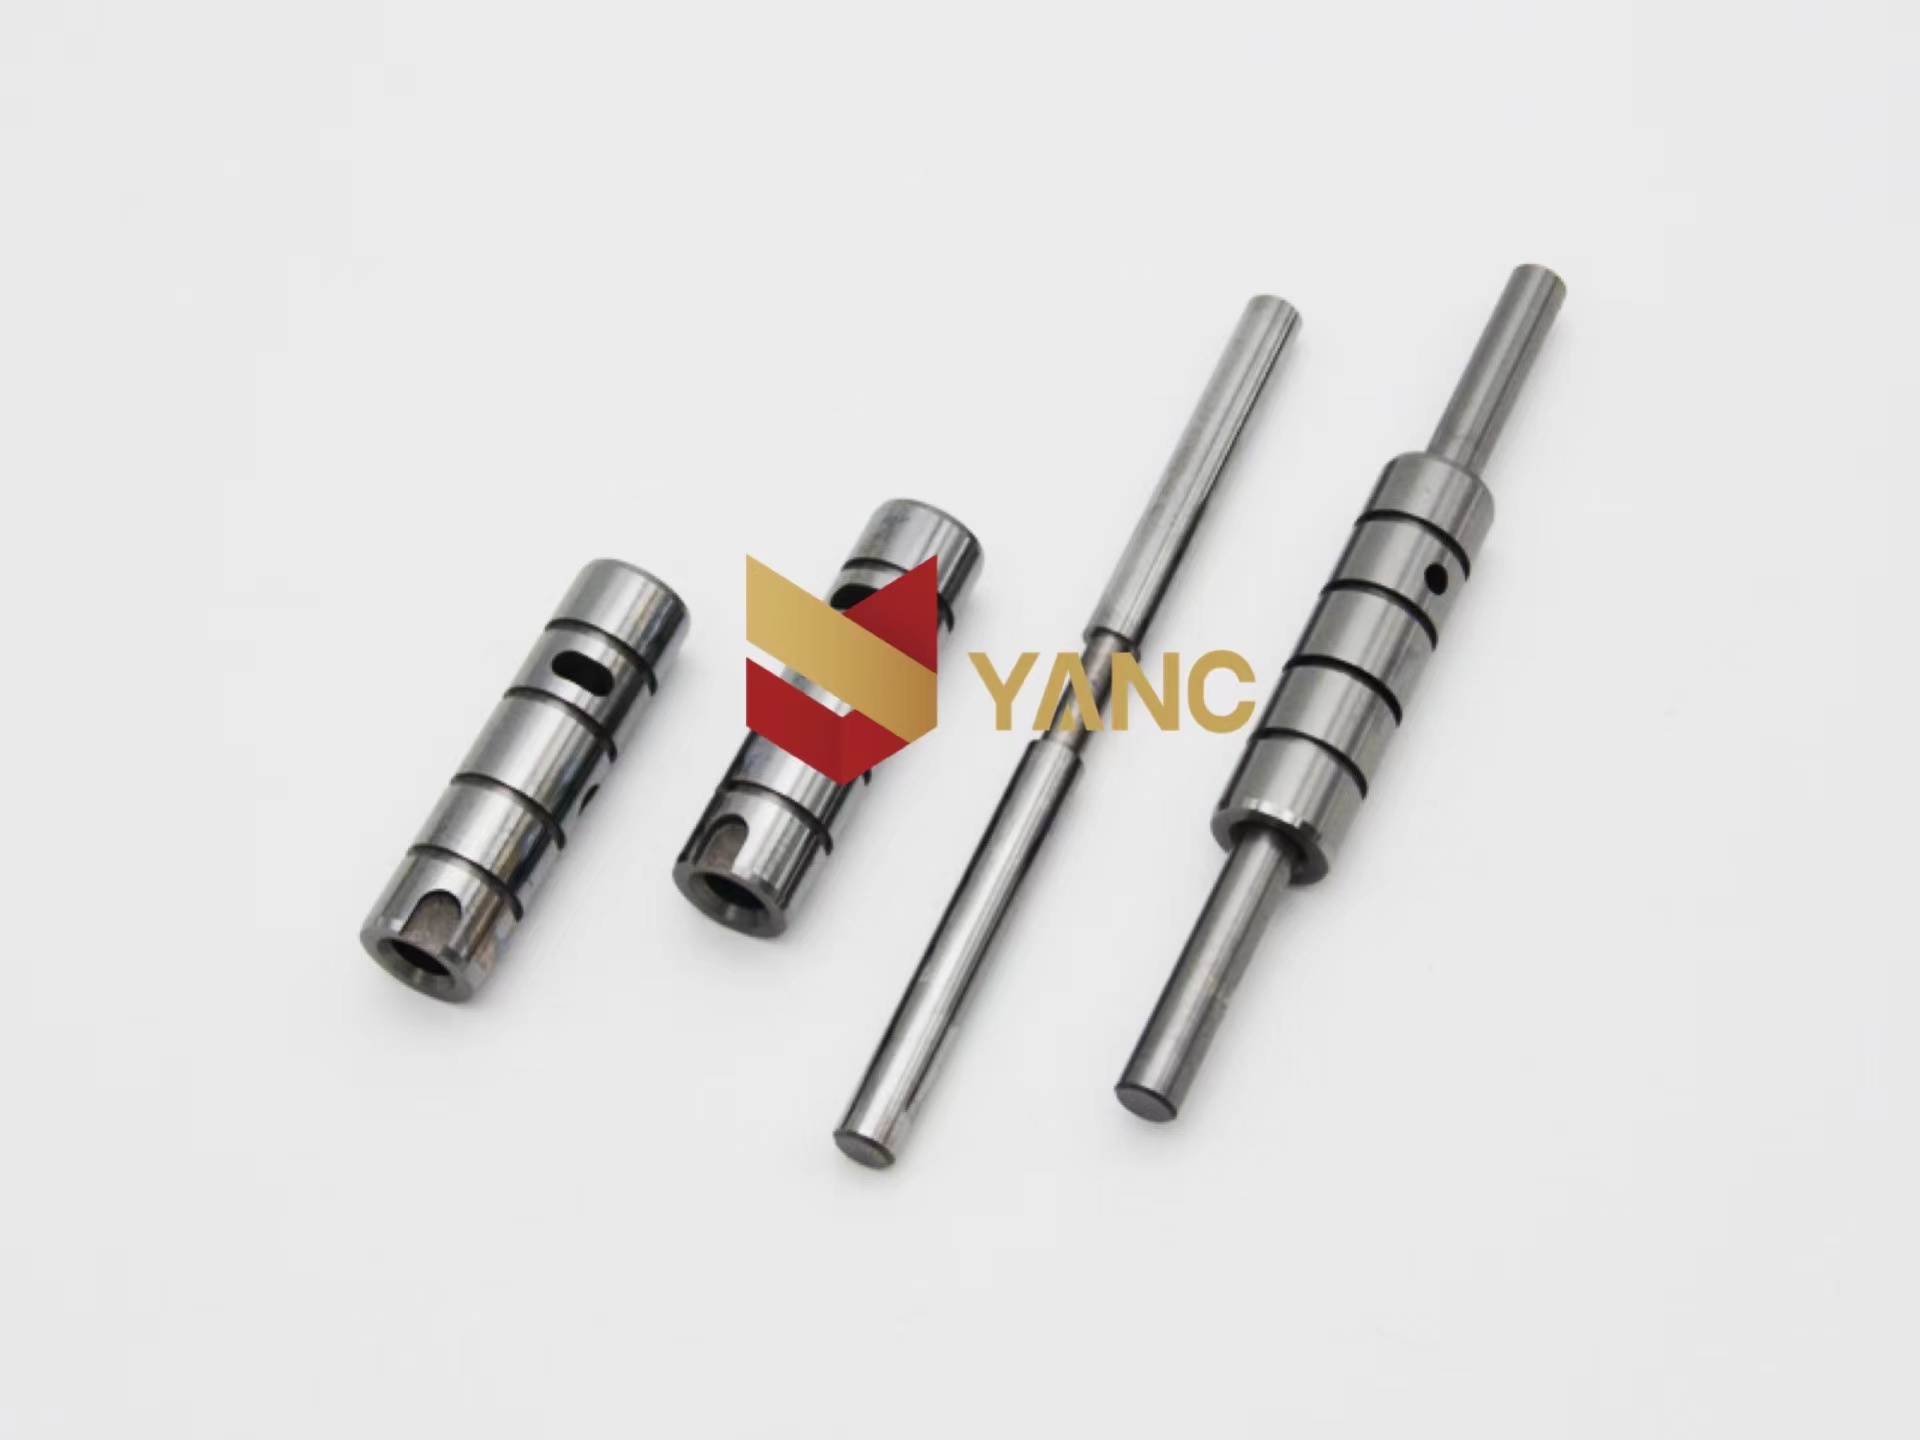 Tungsten carbide dispensing sleeve and pin